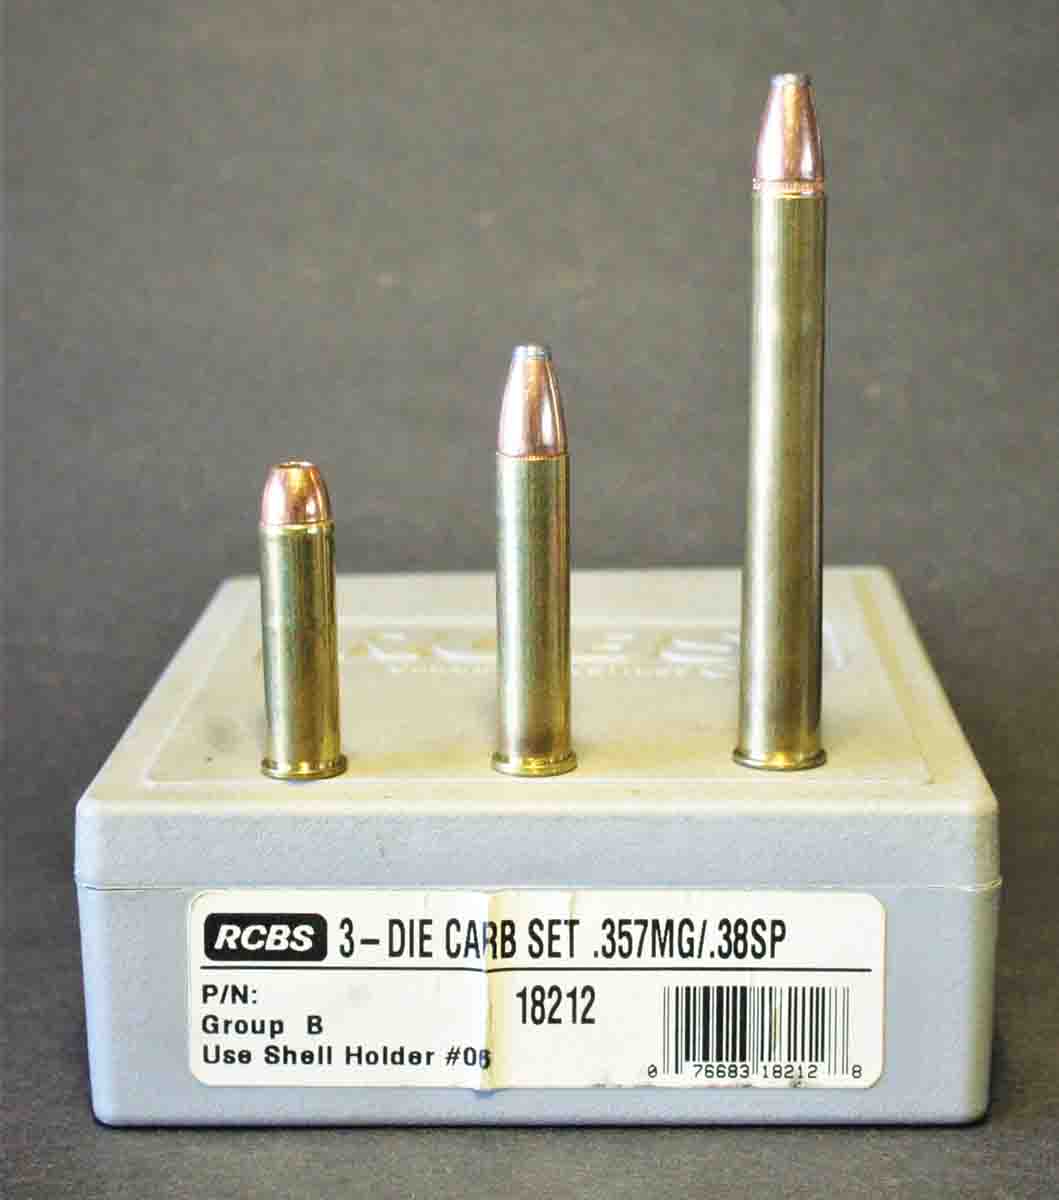 John’s old RCBS dies have now been used to load .357 Magnums, .357 Maximums and the 9x72R, an old German rifle cartridge.